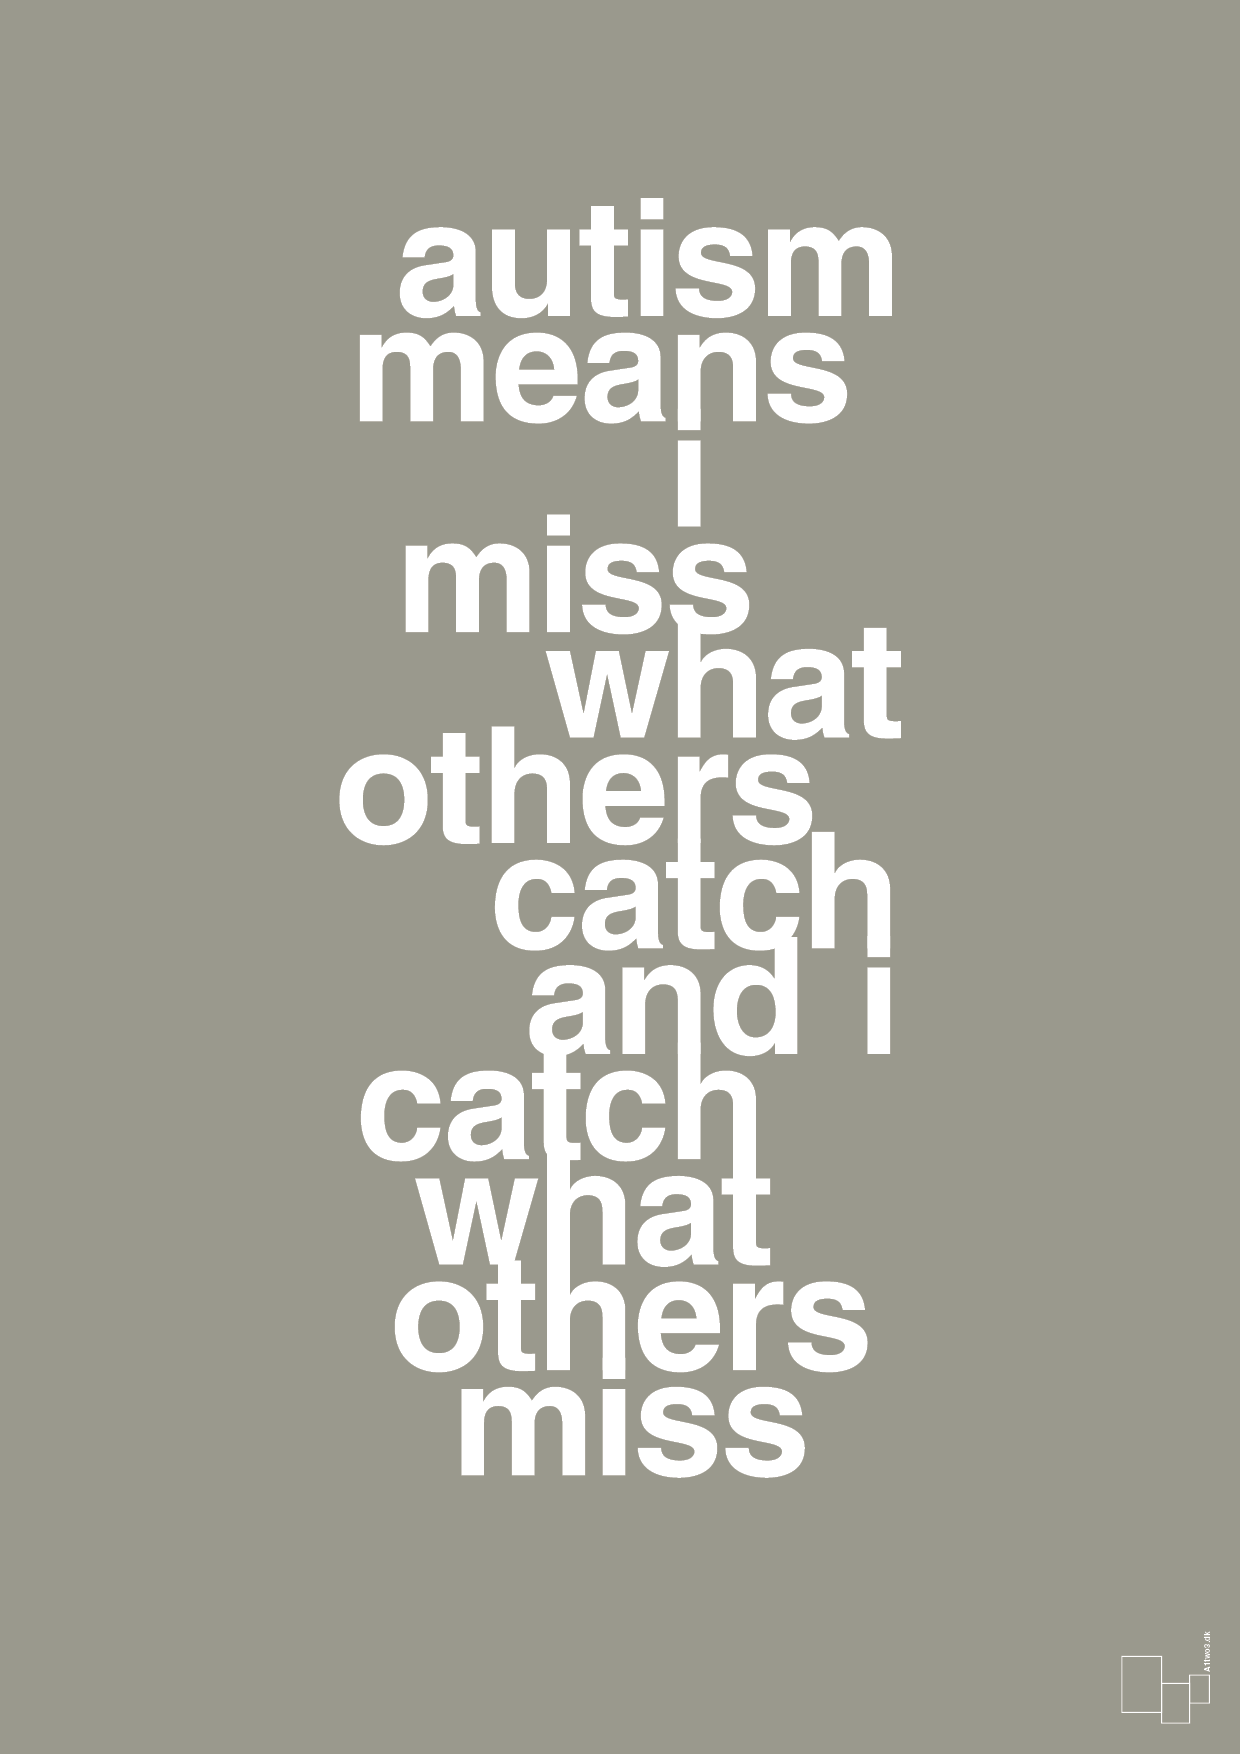 autism means i miss what others catch and i catch what others miss - Plakat med Samfund i Battleship Gray